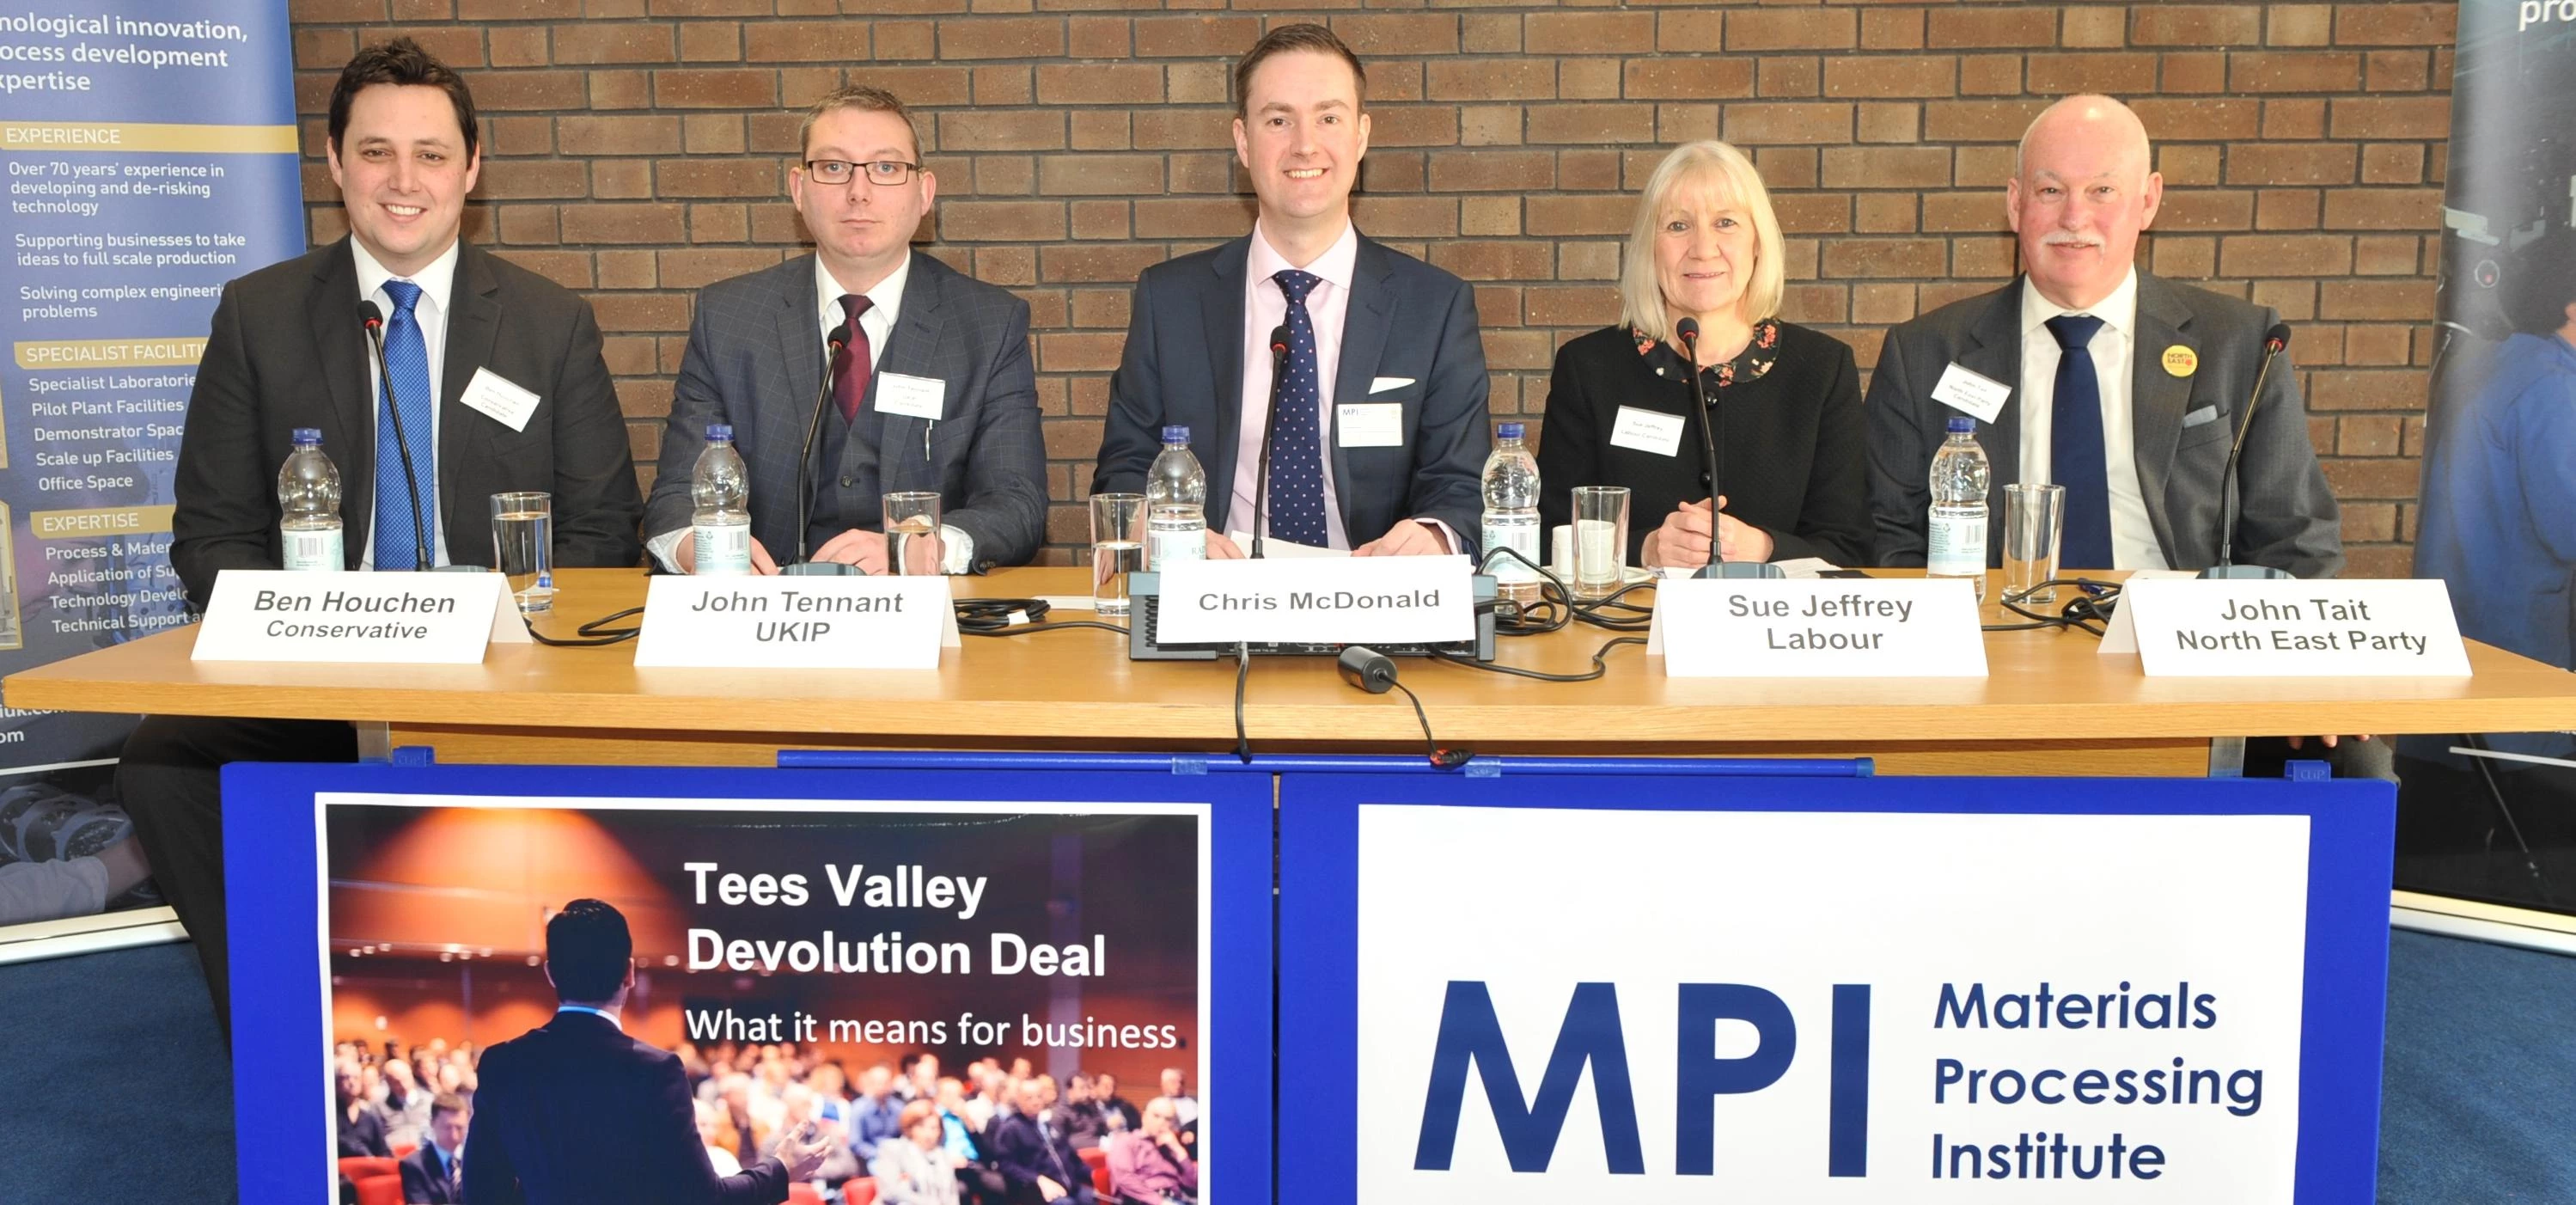 The Tees Valley Mayor candidates with Chris McDonald, CEO of the Materials Processing Institute